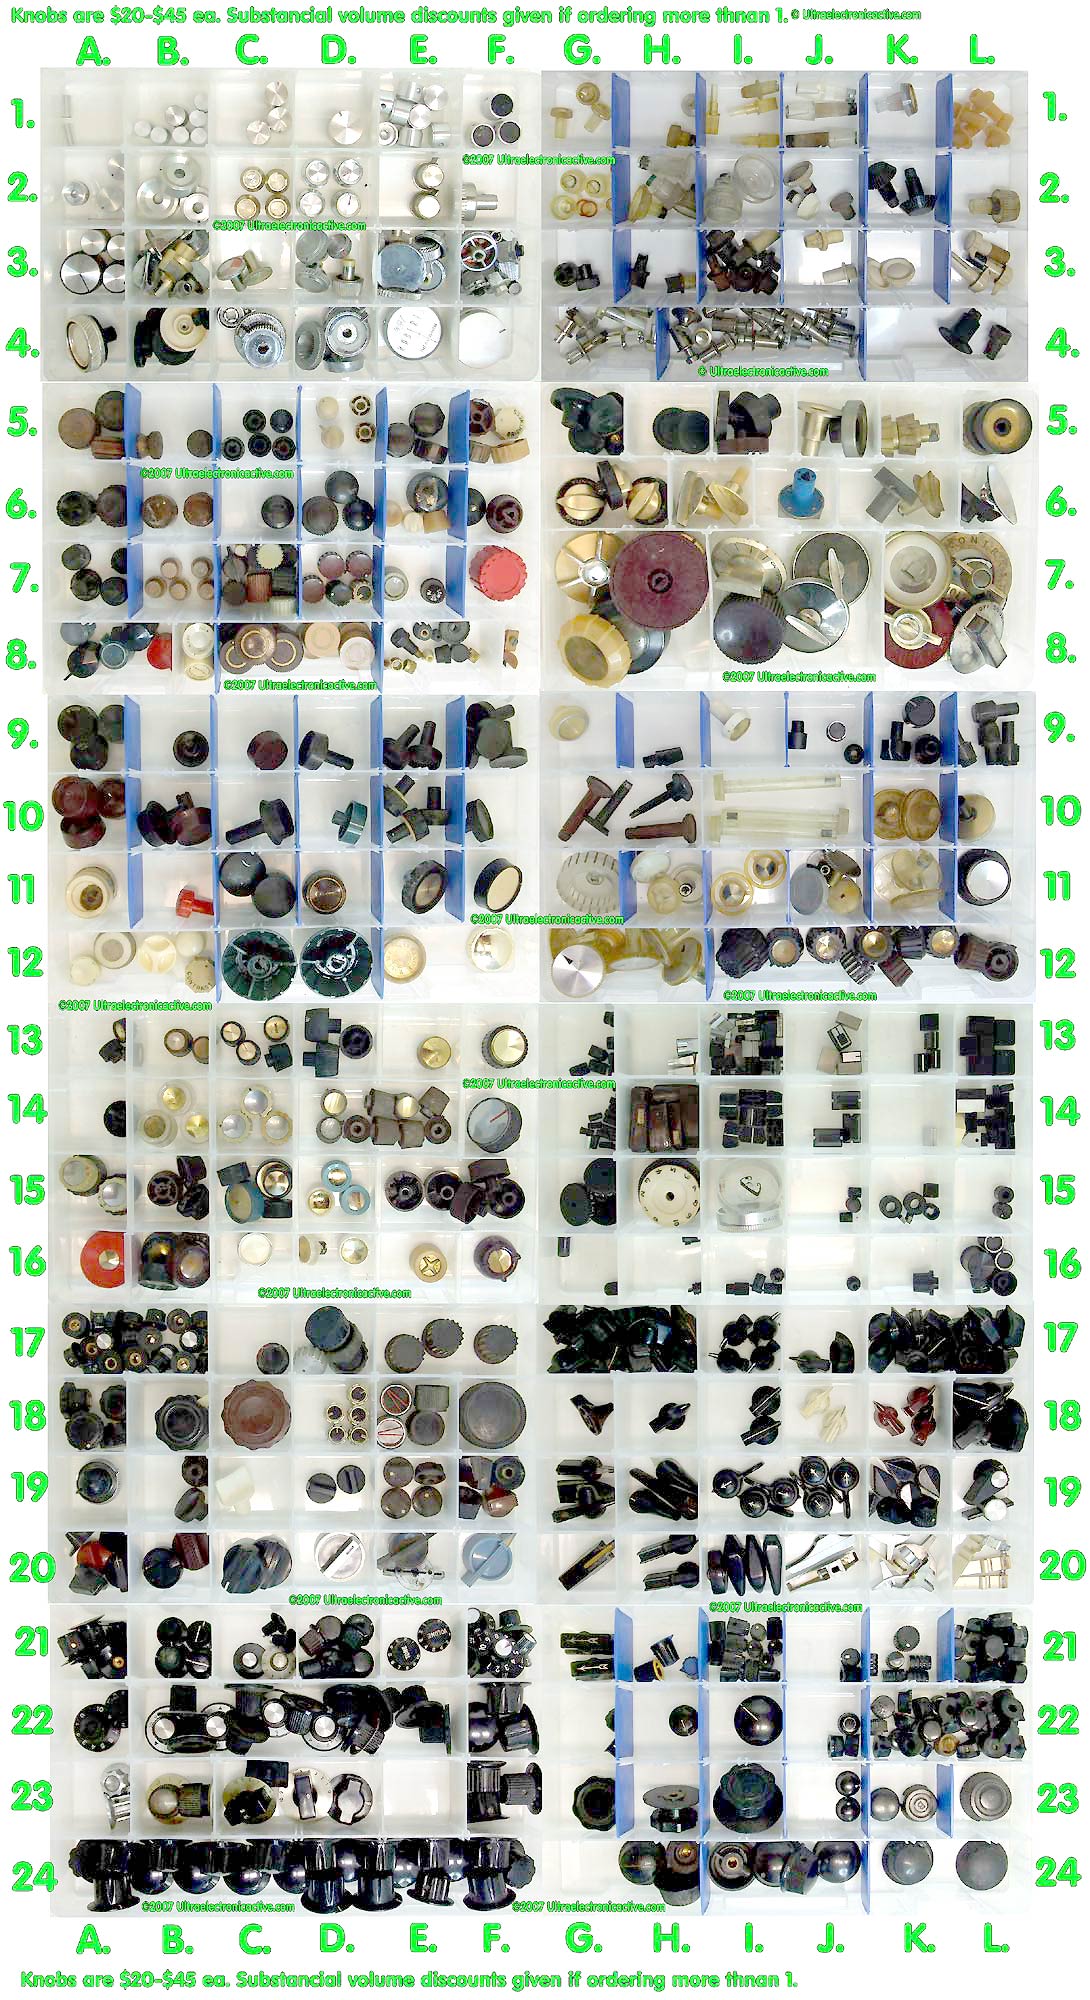 More than 300 types of Vintage Audio Equipment Knobs are available here!